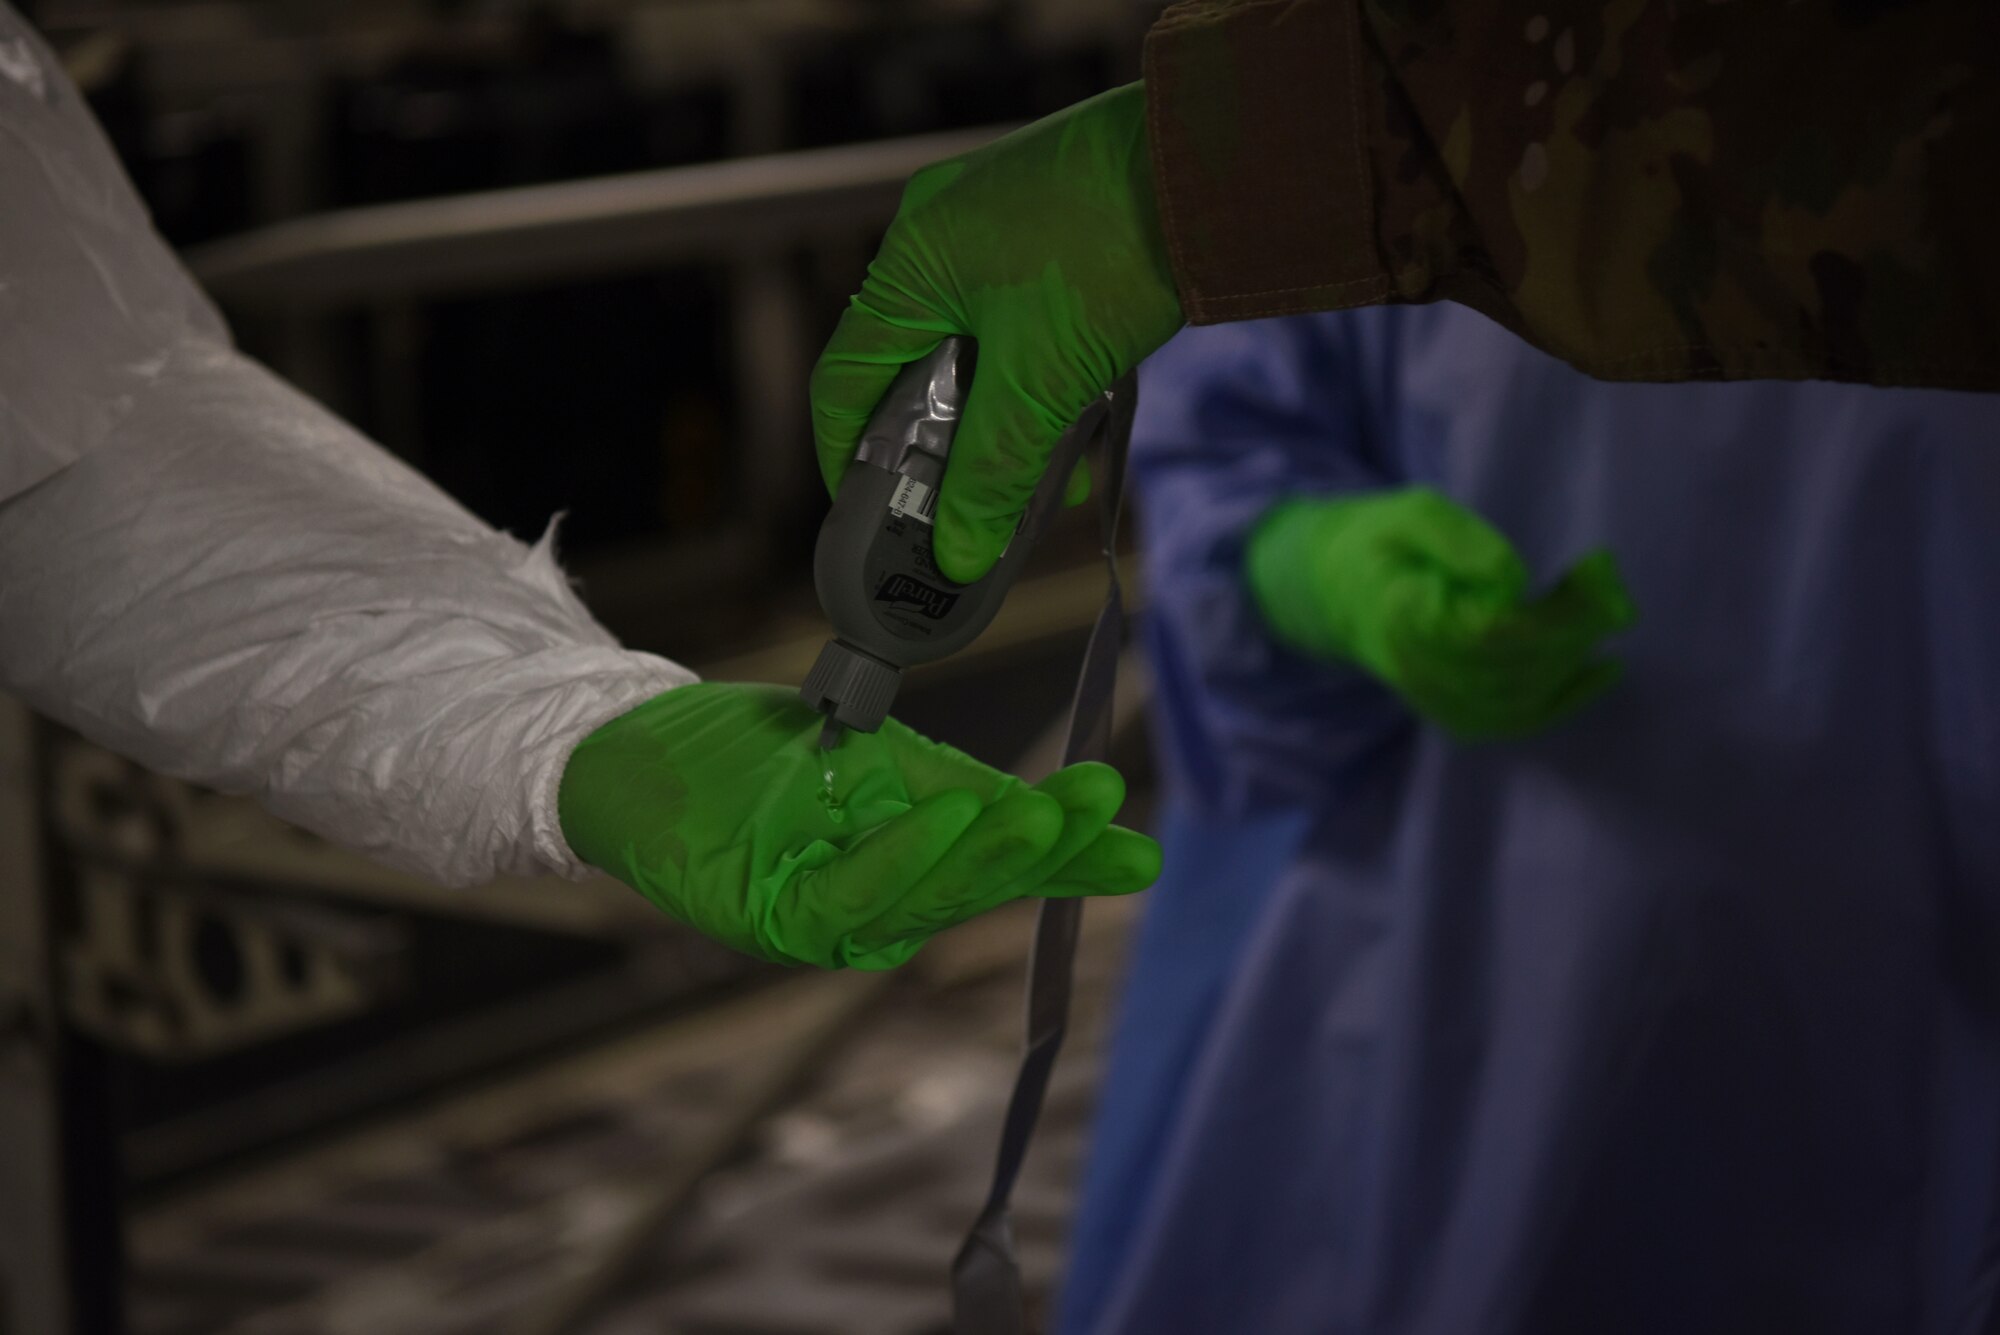 U.S. Air Force Airmen assigned to the 521st Air Mobility Operations Wing sanitize their hands after decontaminating a Transport Isolation System on a U.S. Air Force C-17 Globemaster III aircraft.